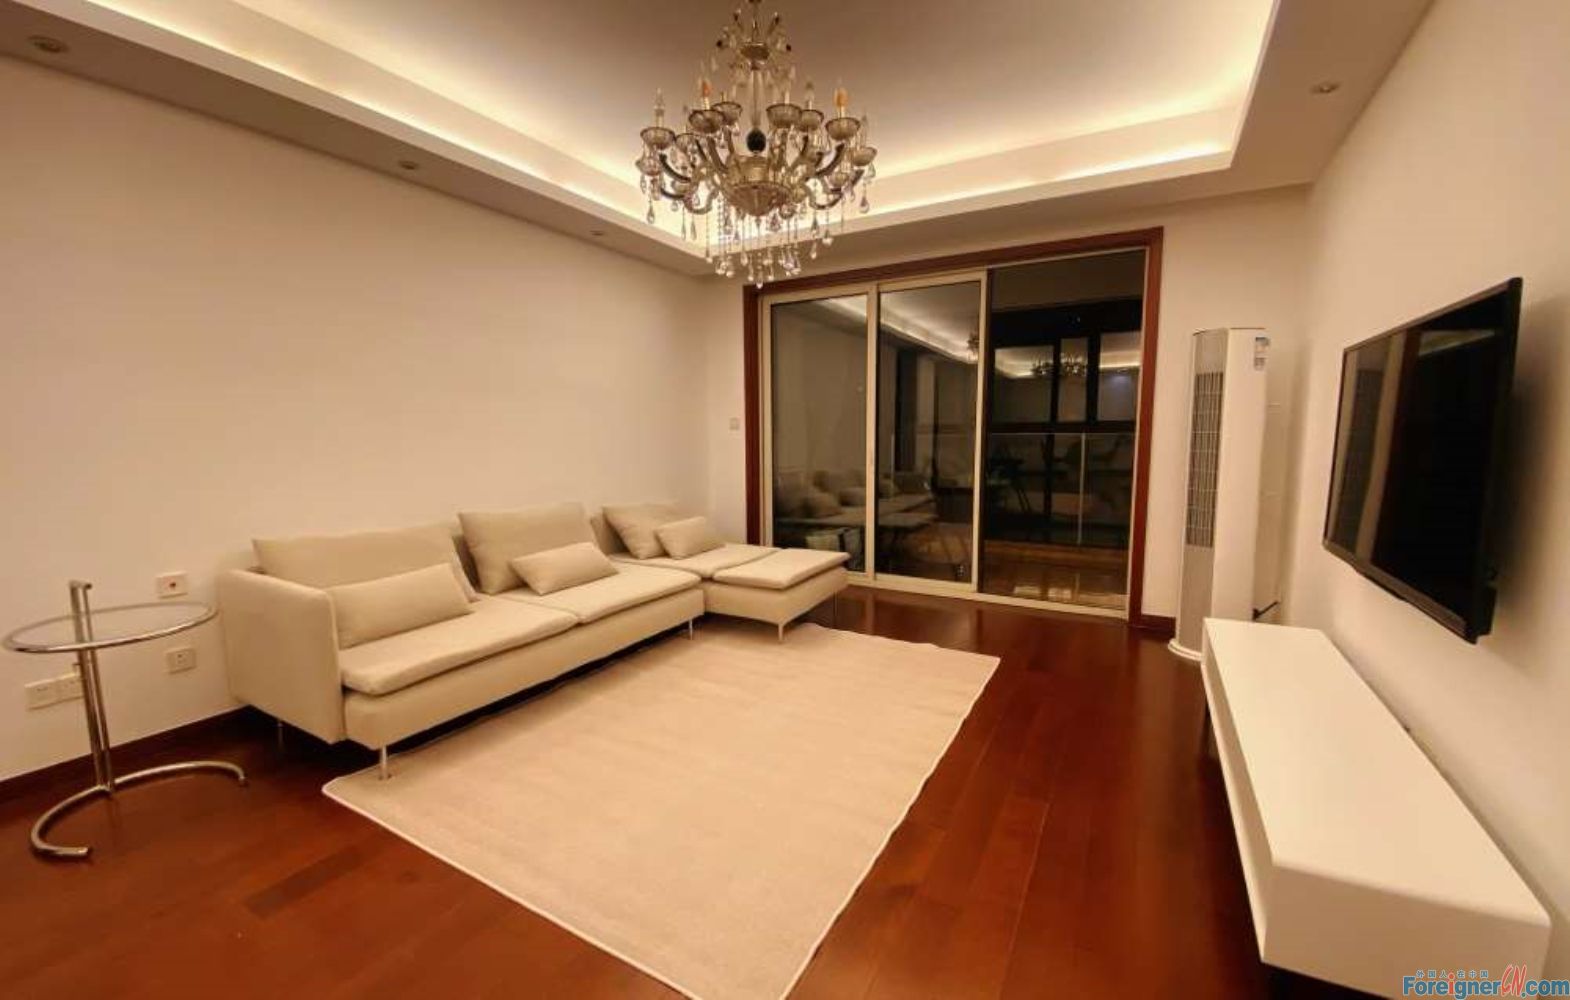 Fabulous！！！ House to rent in Suzhou / 3 bedrooms and 1 bathroom/Warm rooms/Jinji lake Nearby/Subway station 